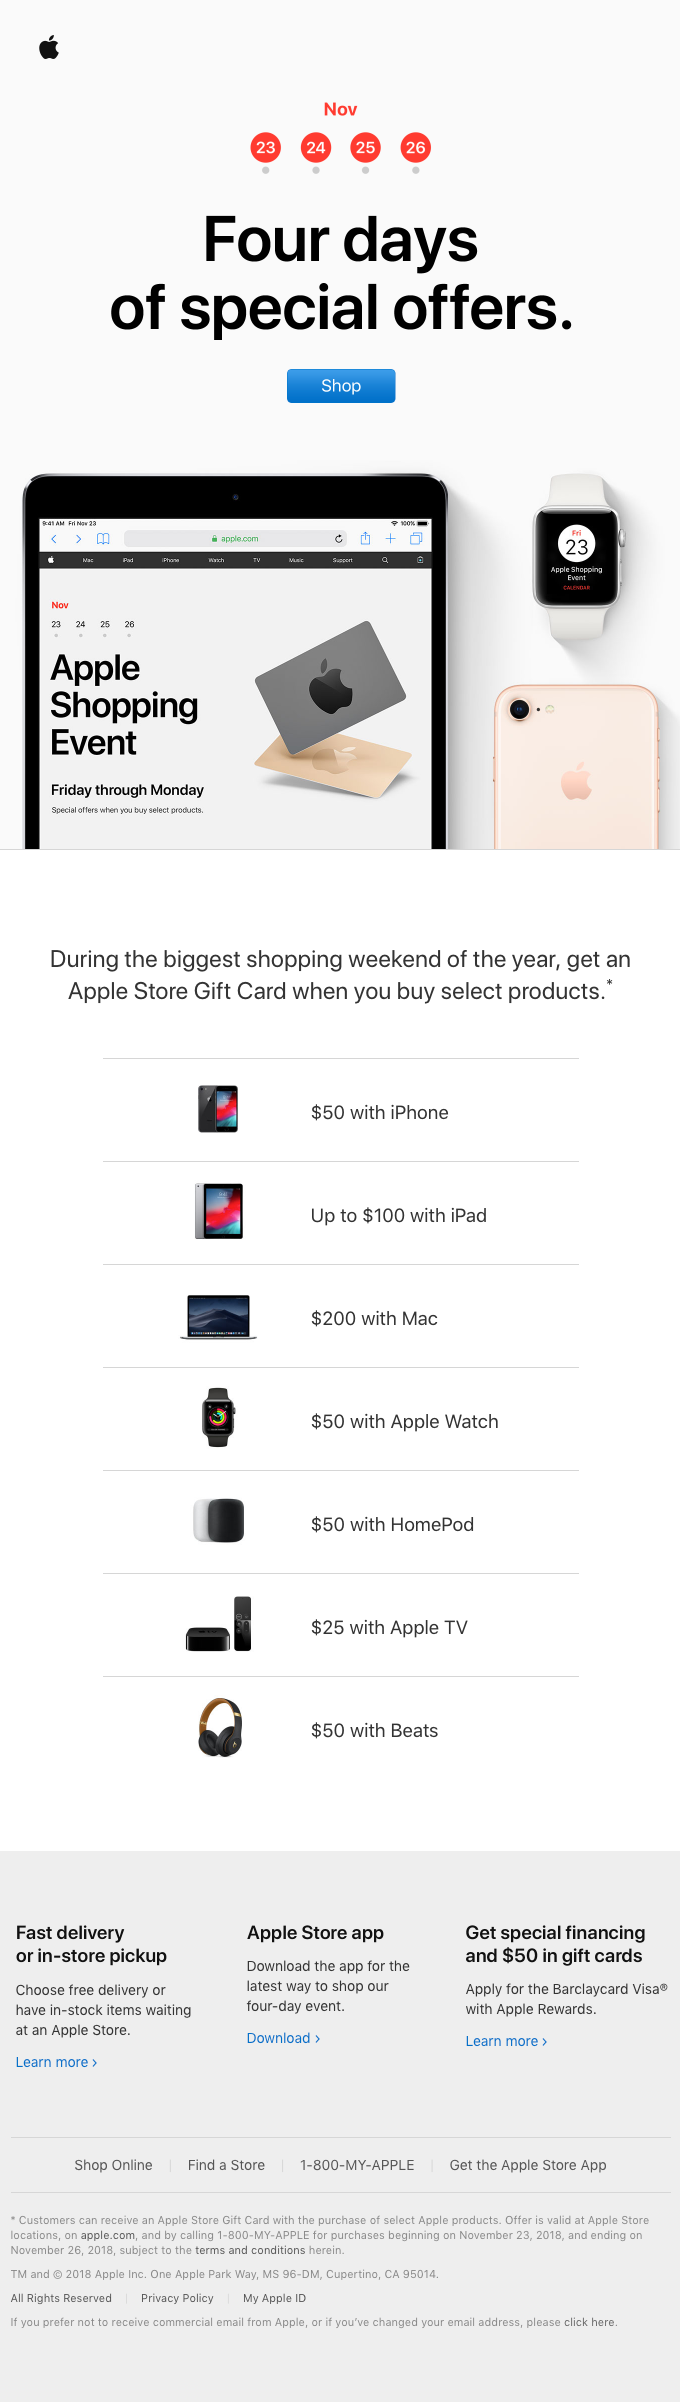 The Apple Shopping Event. Now through Monday